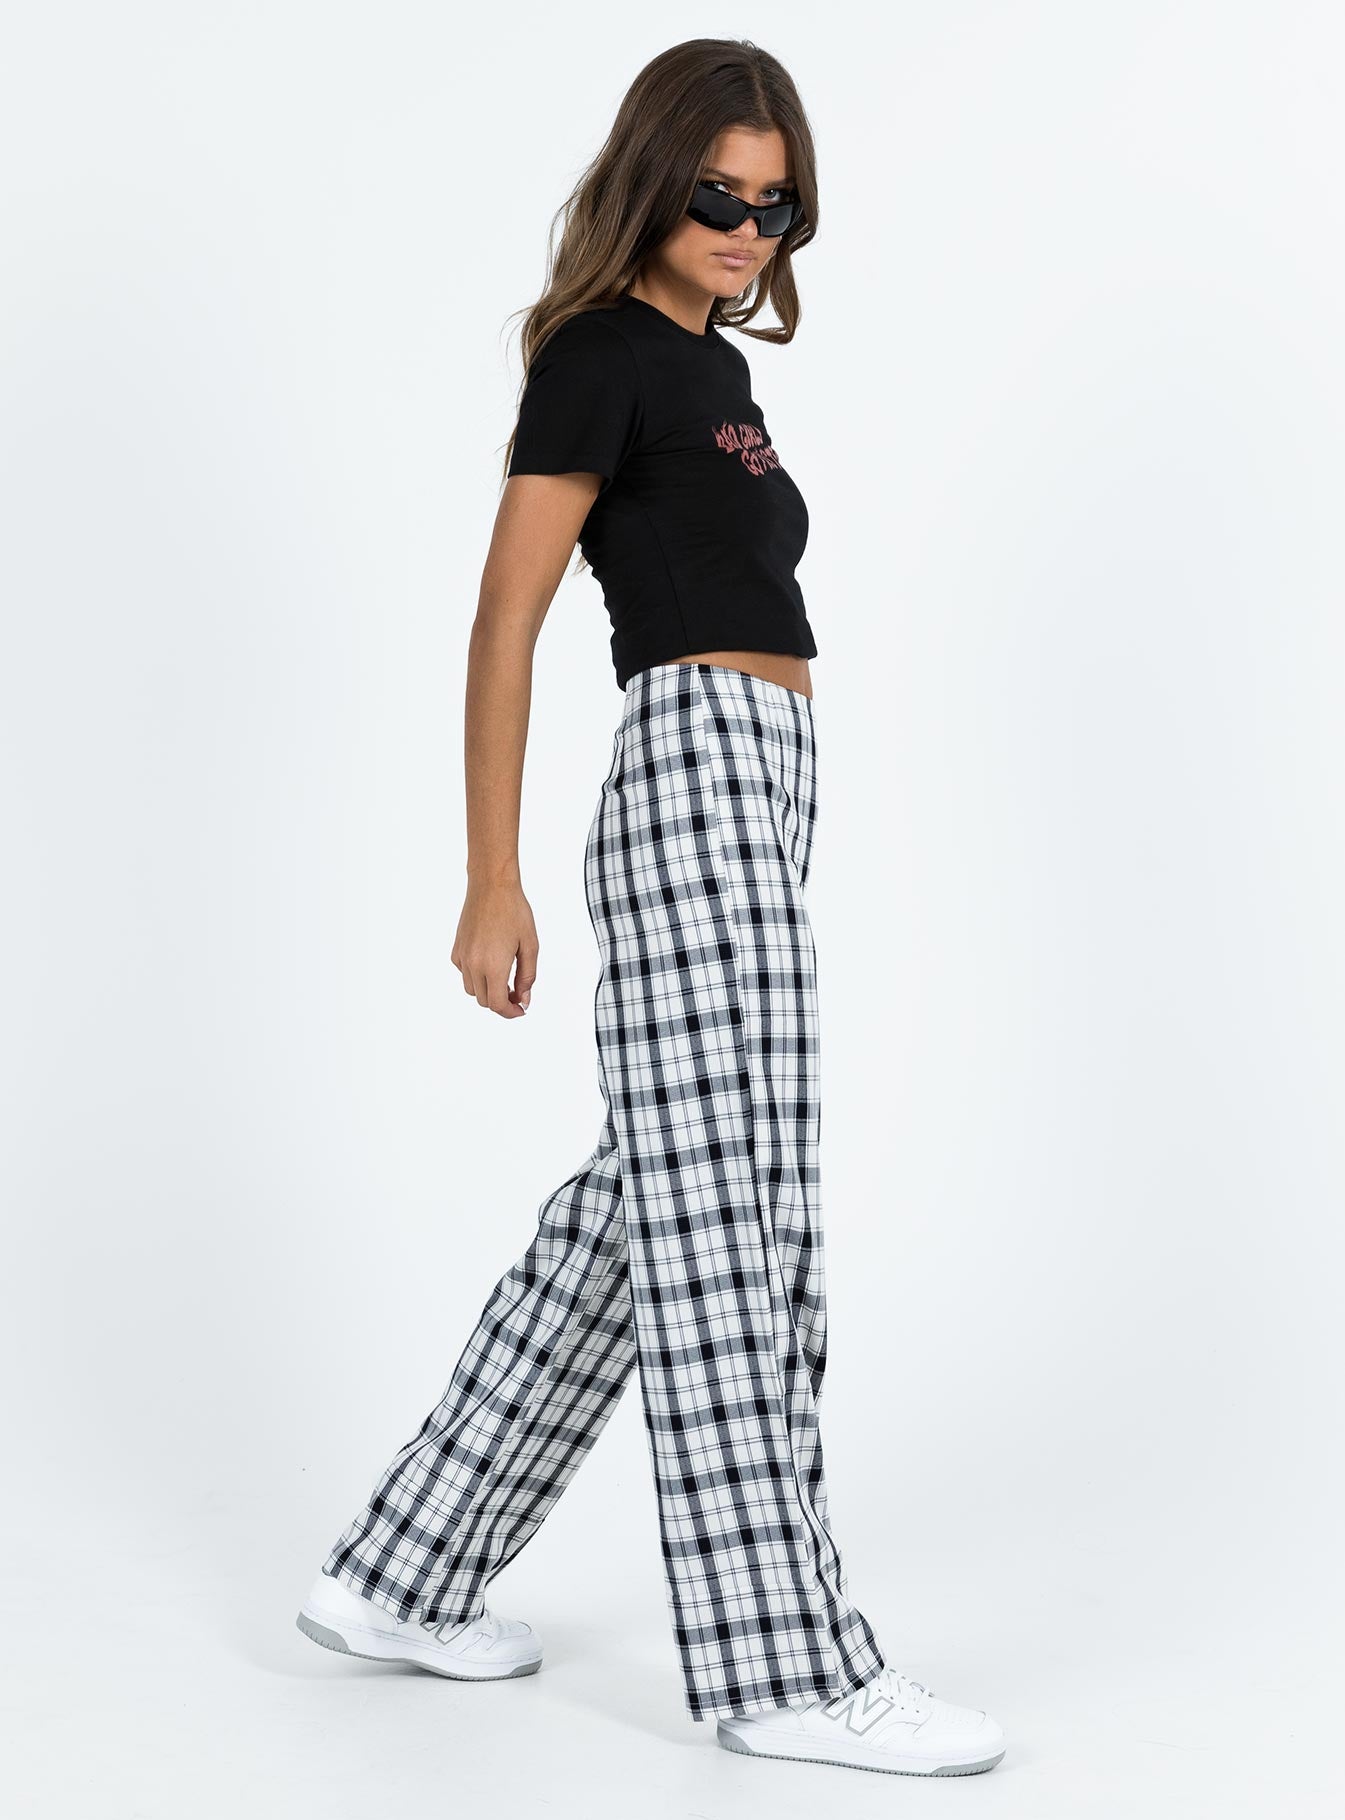 ZARA White And Black Knit Houndstooth Check Pants | Relove